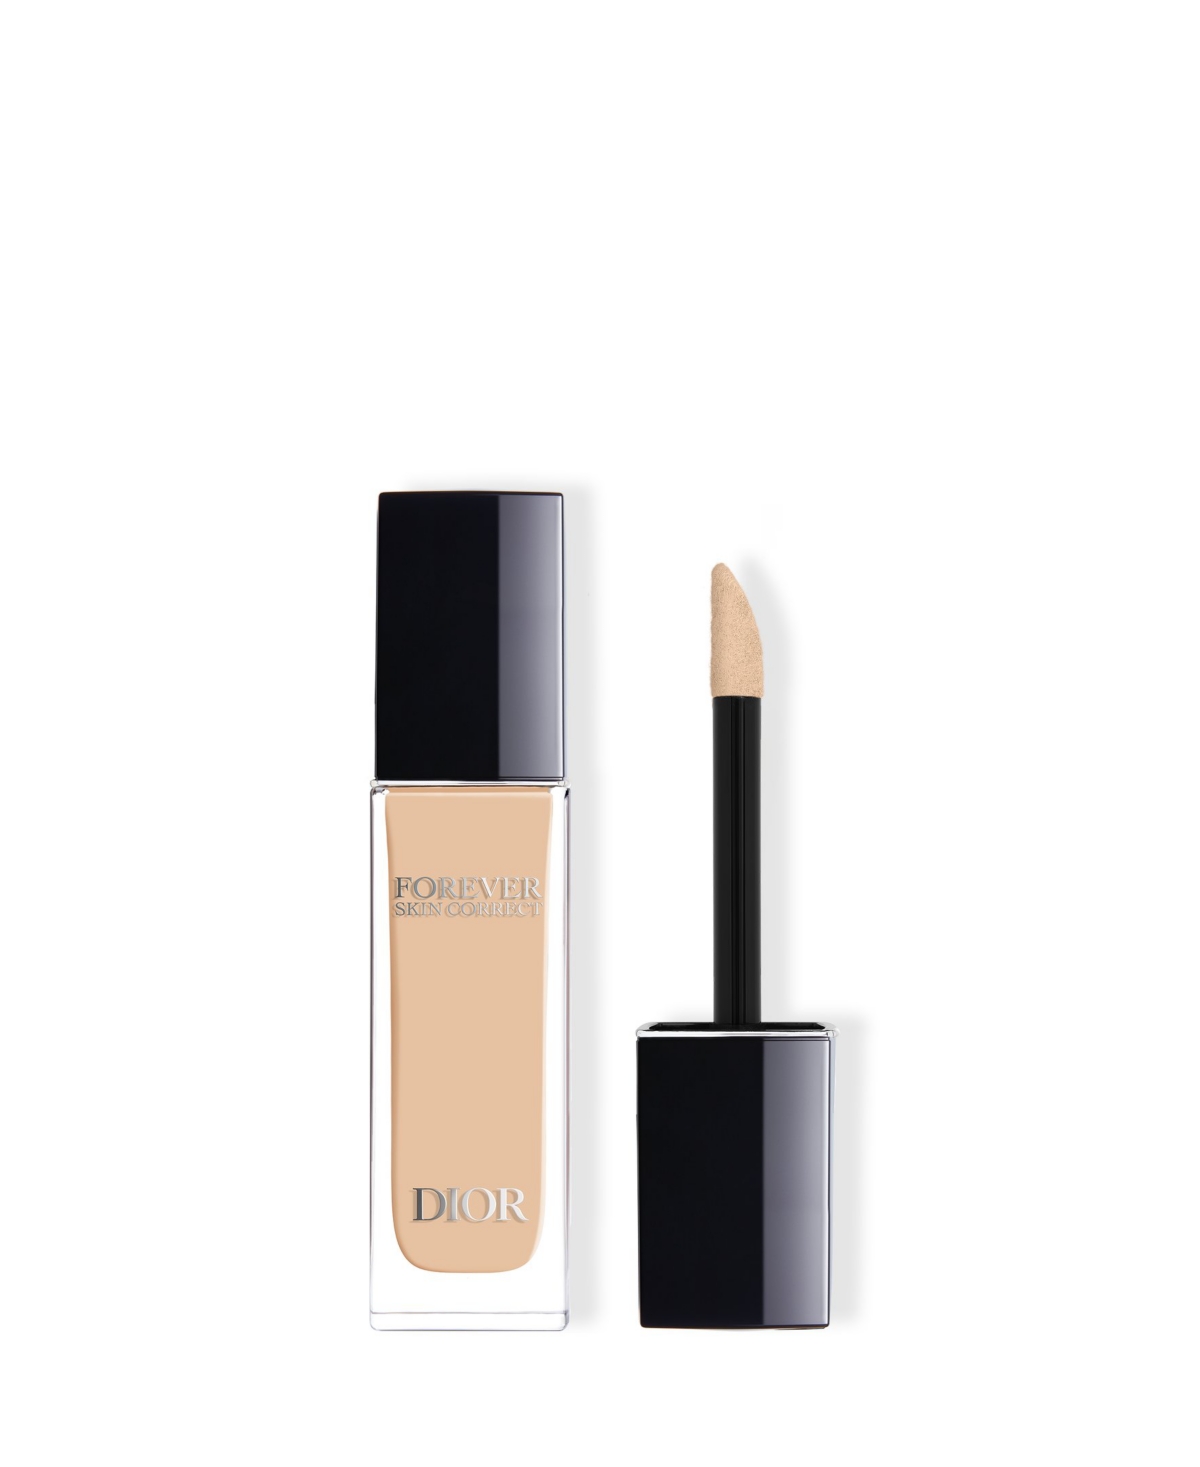 Dior Forever Skin Correct Full-coverage Concealer In W Warm (light Skin With Golden Undertone